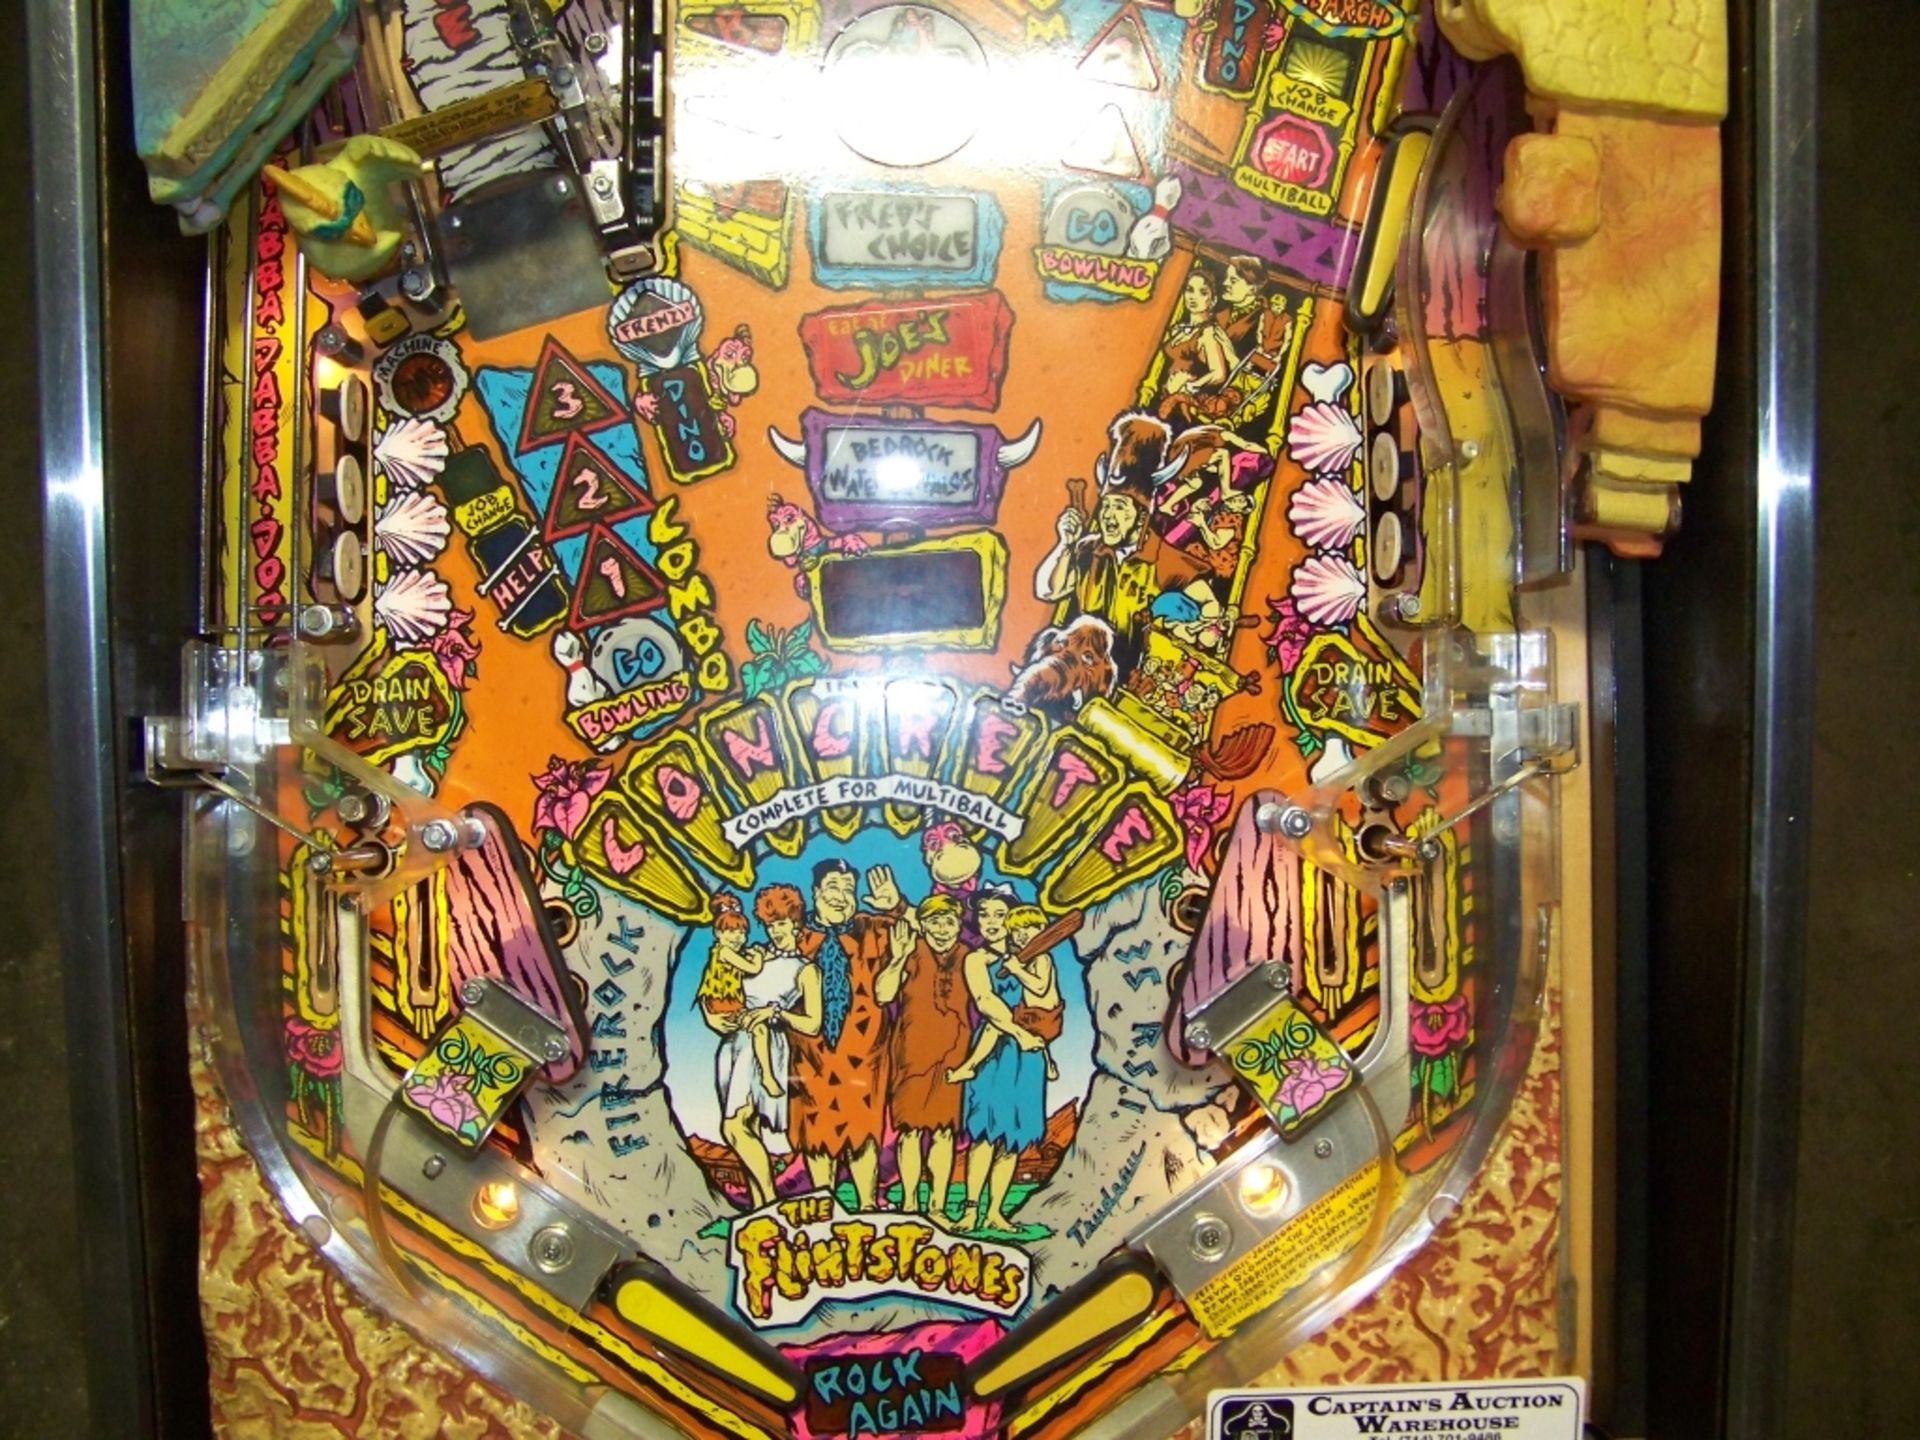 FLINSTONES THE MOVIE PINBALL MACHINE WILLIAMS 1994 Item is in used condition. Evidence of wear and - Image 10 of 11